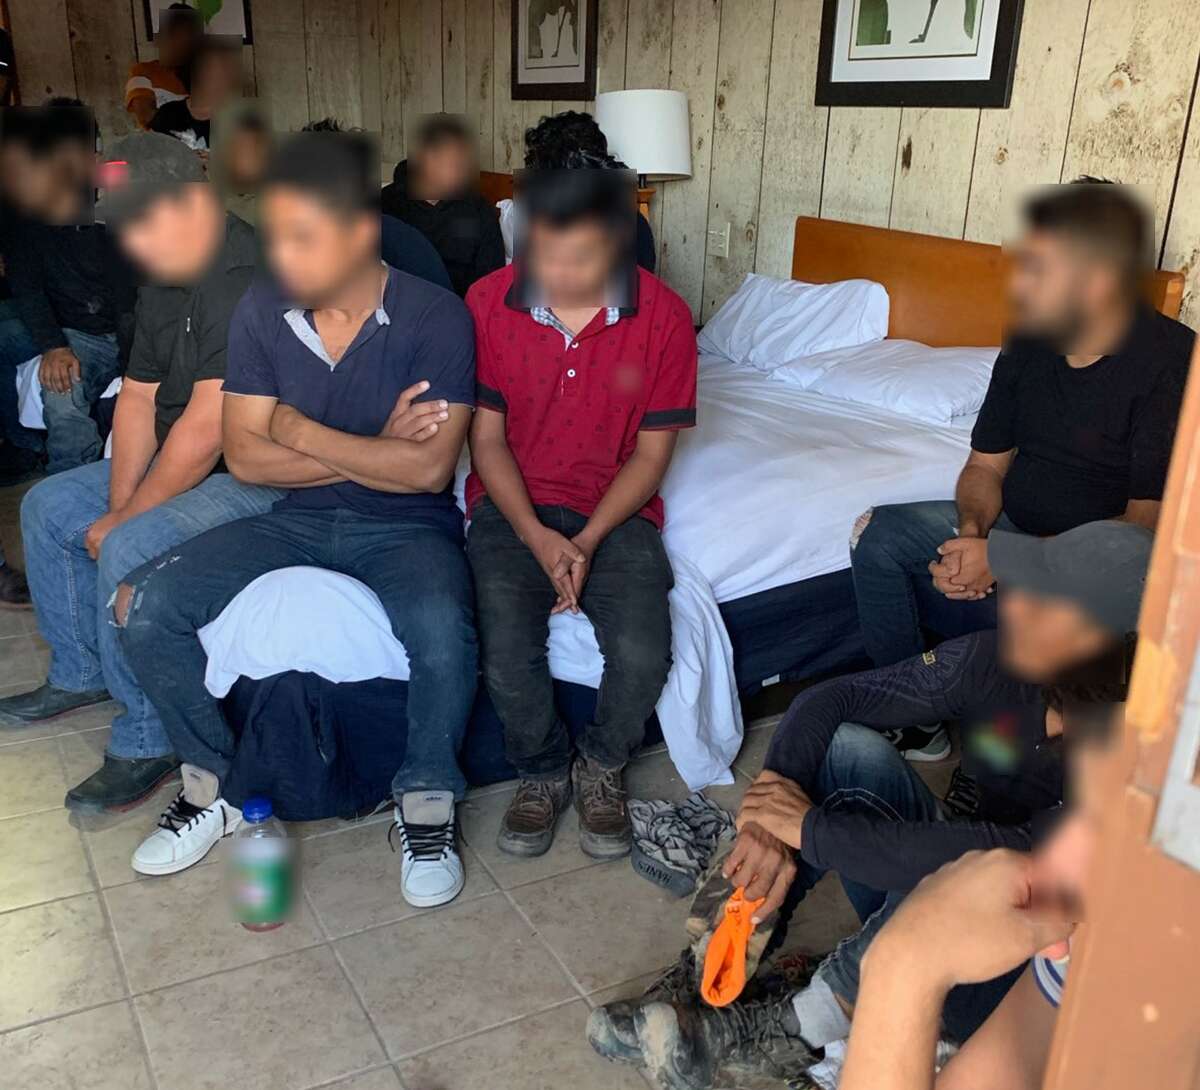 A pair of stash houses were shut down in Laredo on June 2, 2022 leading to the discovery of around 60 individuals in the country illegally.